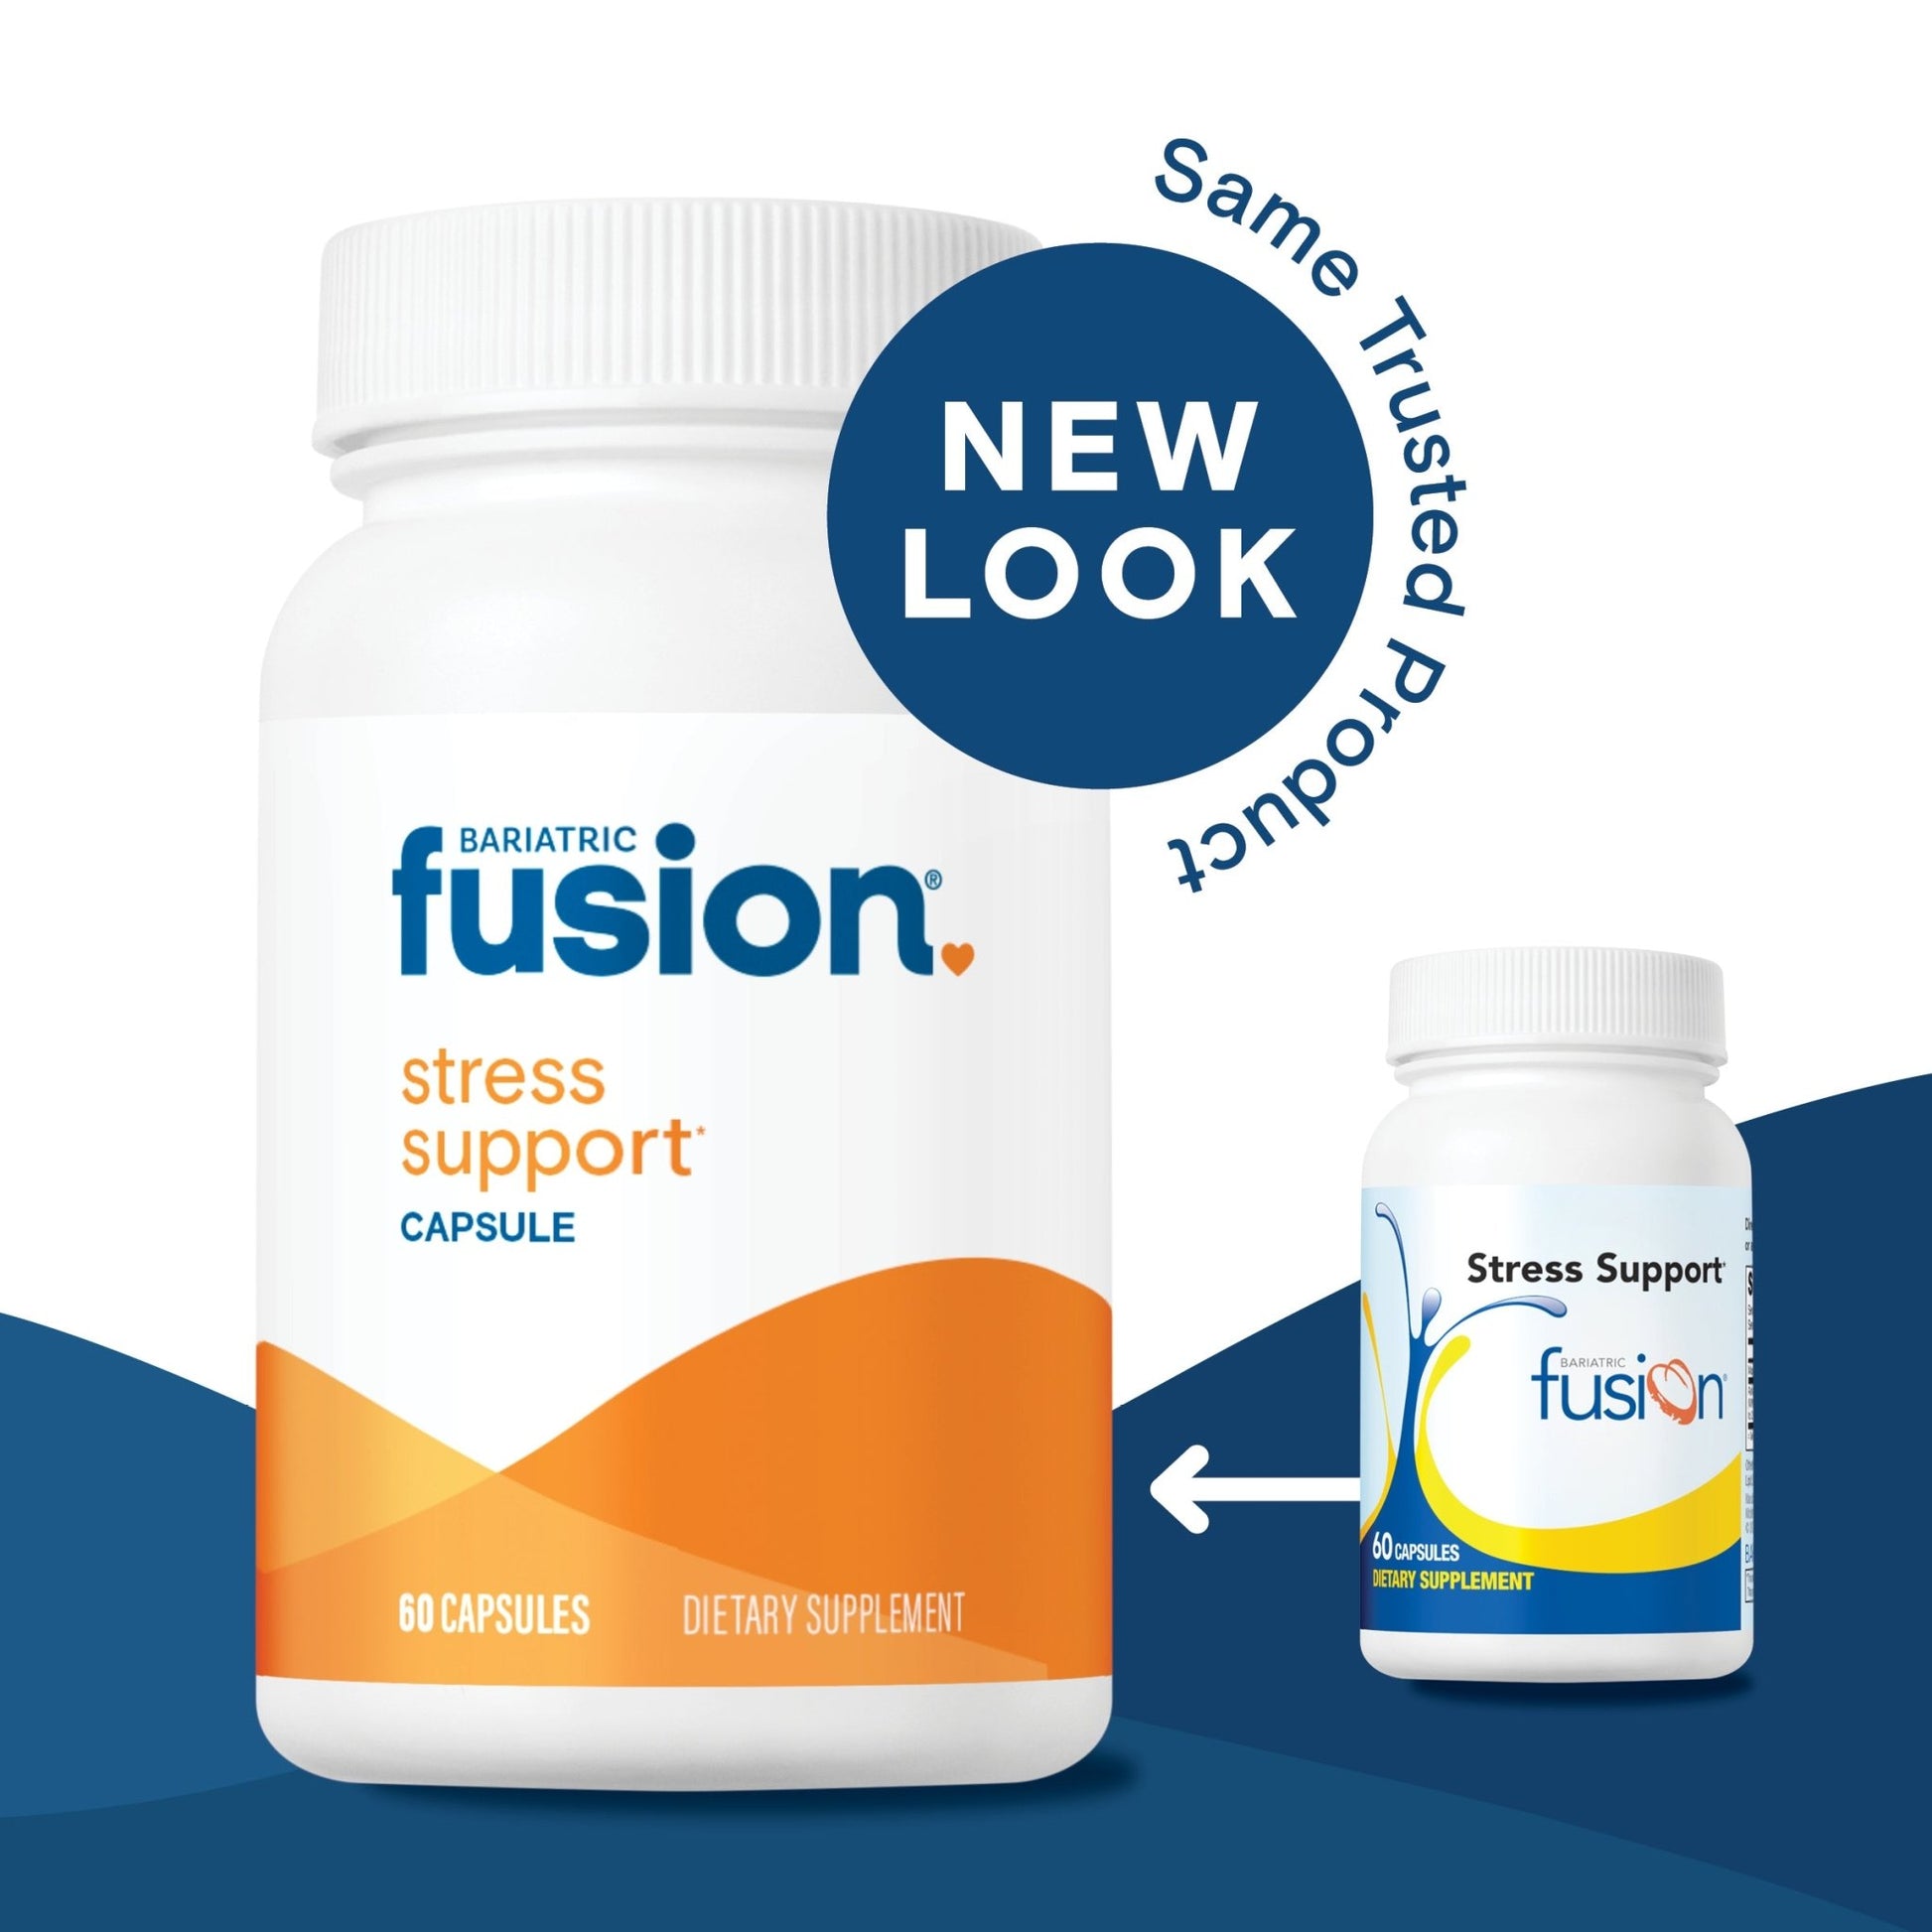 Stress Support new look, same trusted product.